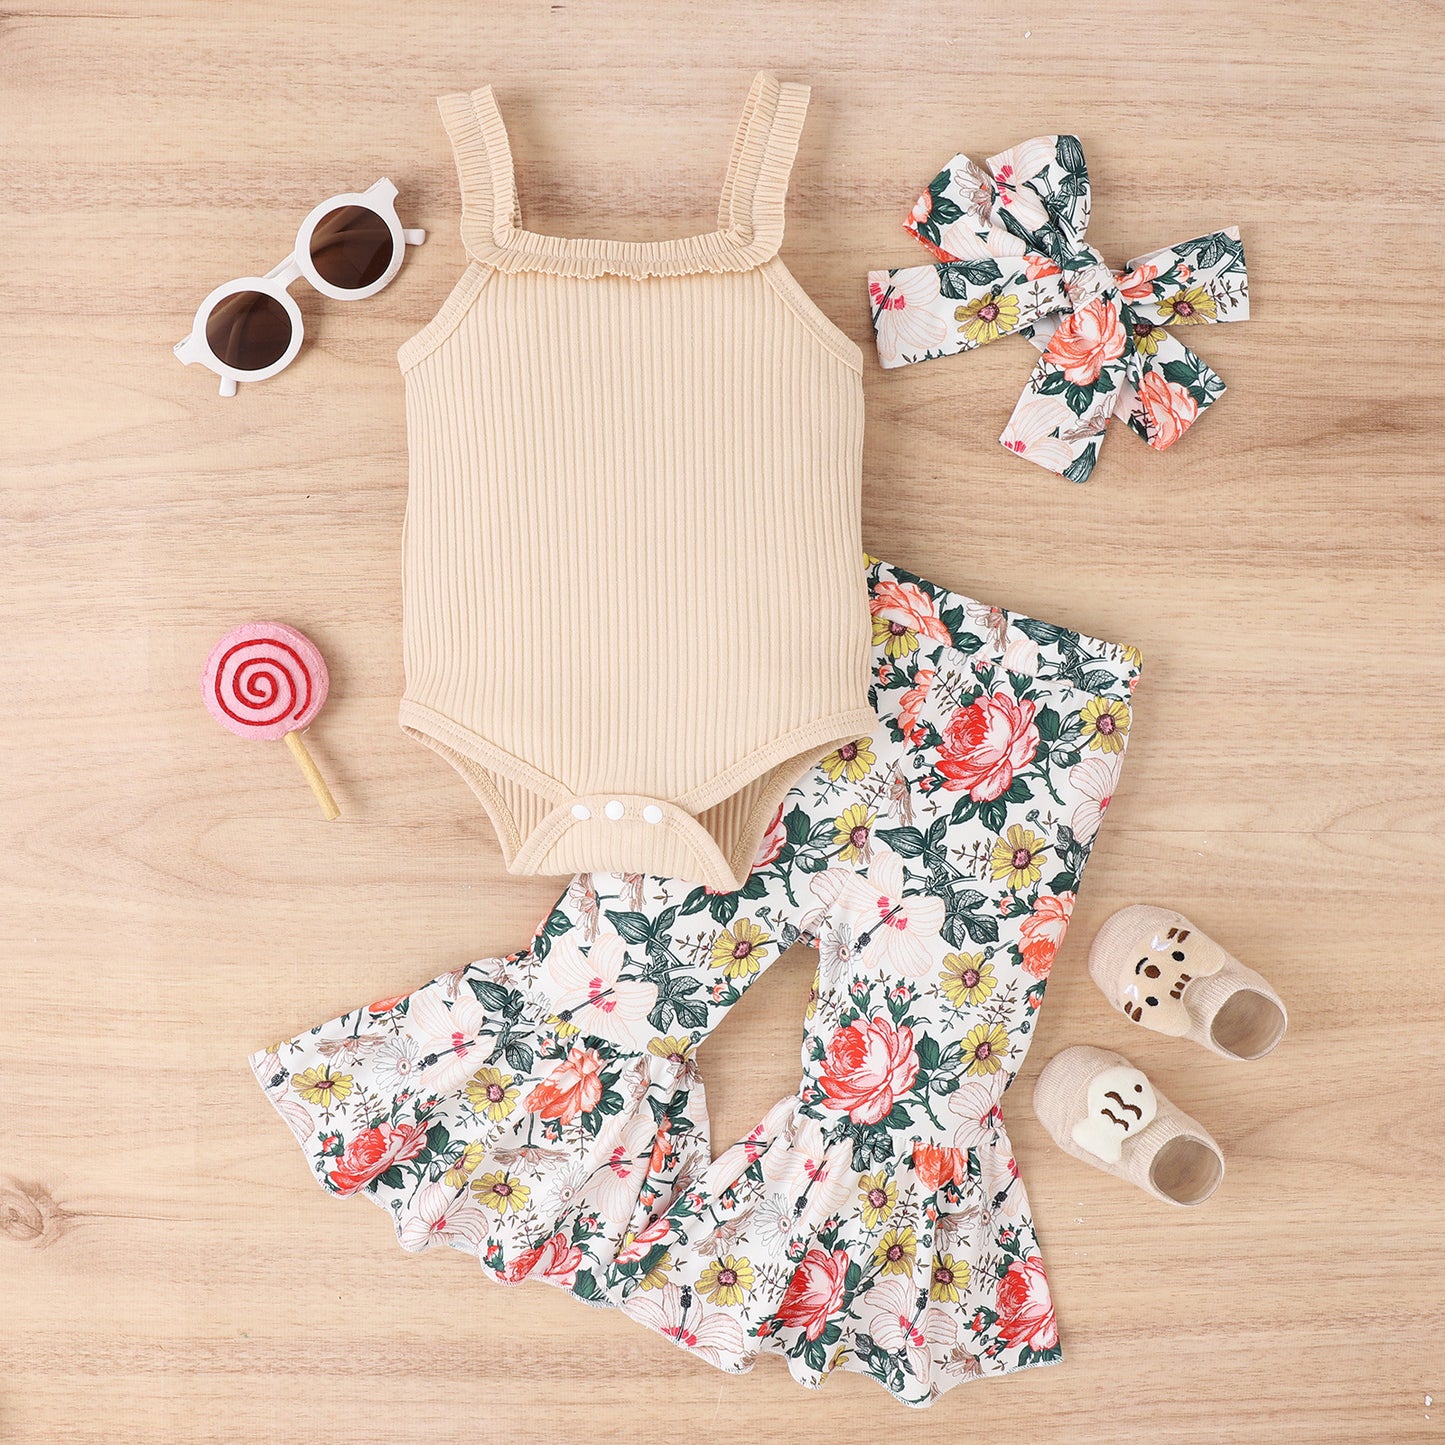 Onesie & Flower Printed Trousers With Hairbow -3pc set